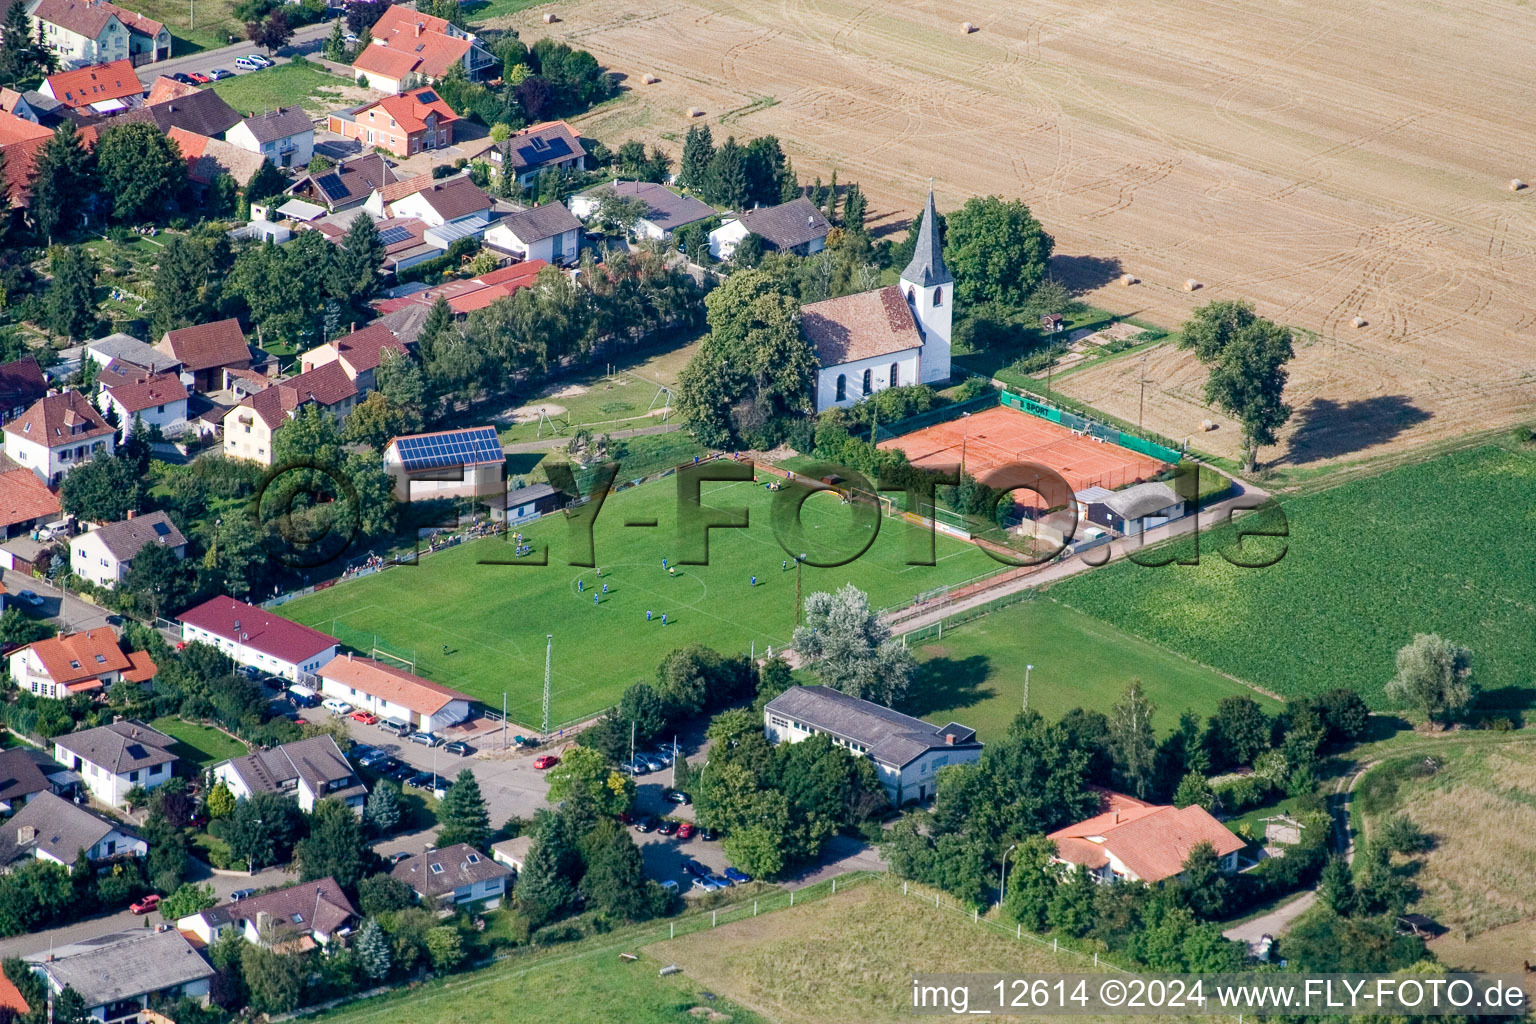 Churches building the chapel at soccer-field in Altdorf in the state Rhineland-Palatinate